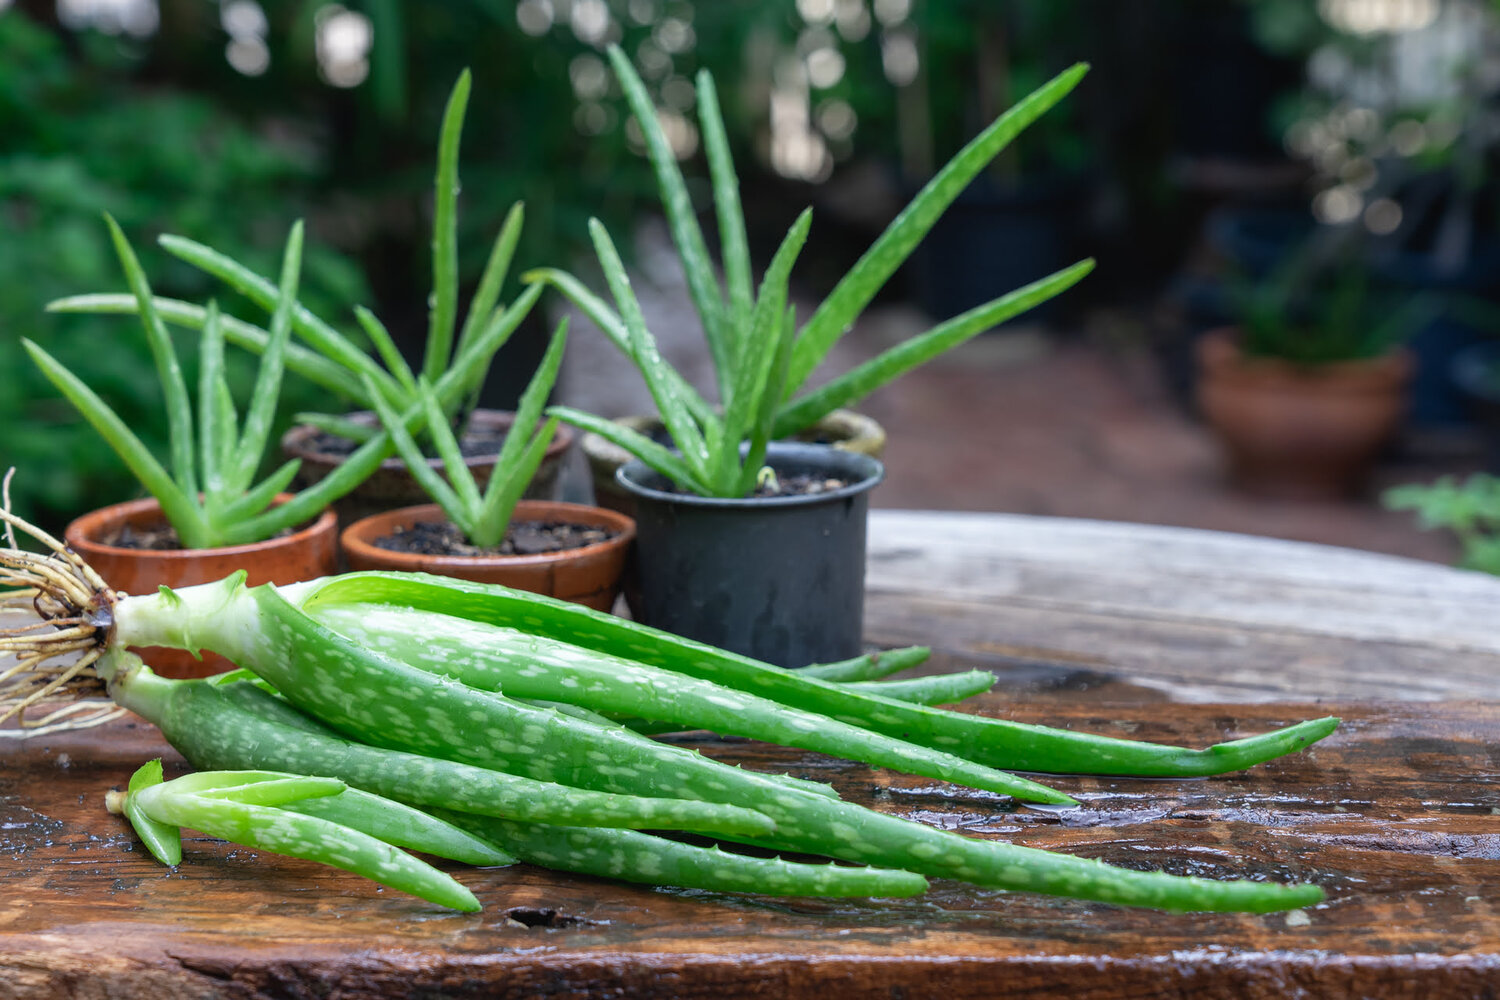 How To Store Aloe Vera Leaf Without Refrigeration